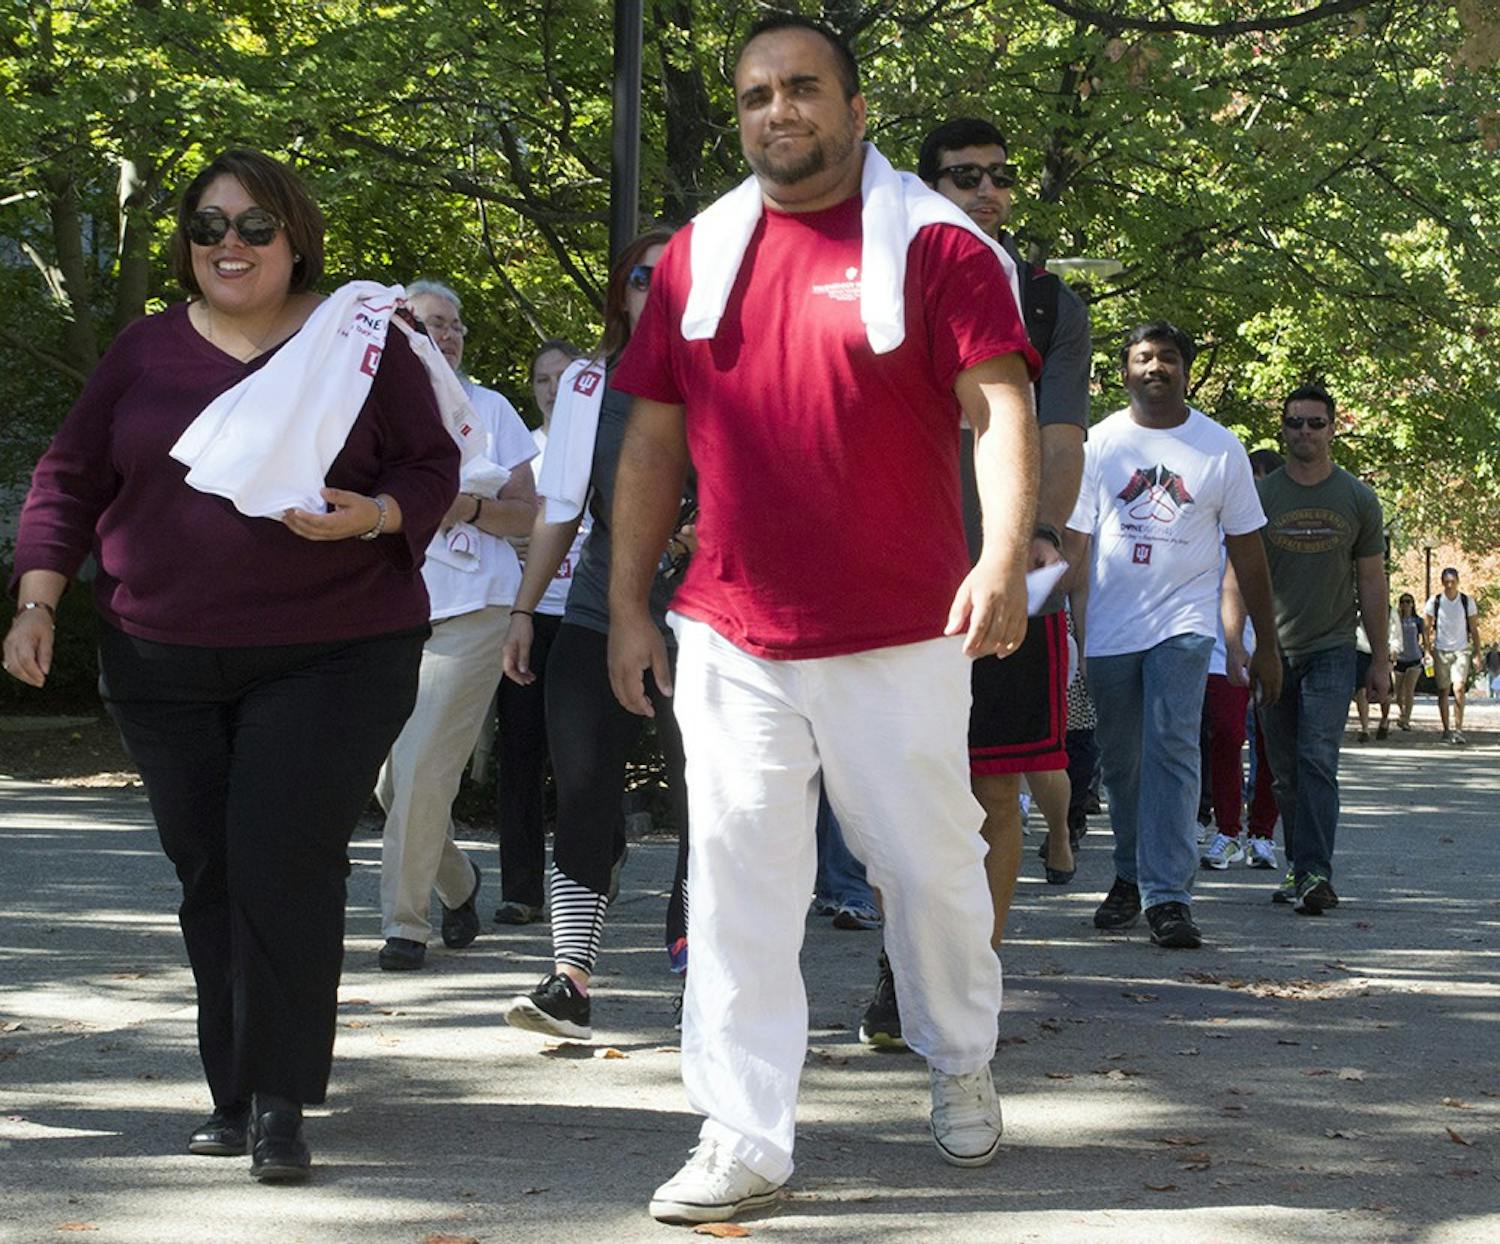 Nelda Montemayor and Mazias de Oliveira walk to Sholwalter Fountain to finish their one mile walk in observance of World Heart Day in recognition of the high rates of heart disease related deaths in Indiana. "Coming out here and seeing everyone wanting to be healthy, I think that's a motivator," Montemayor said.